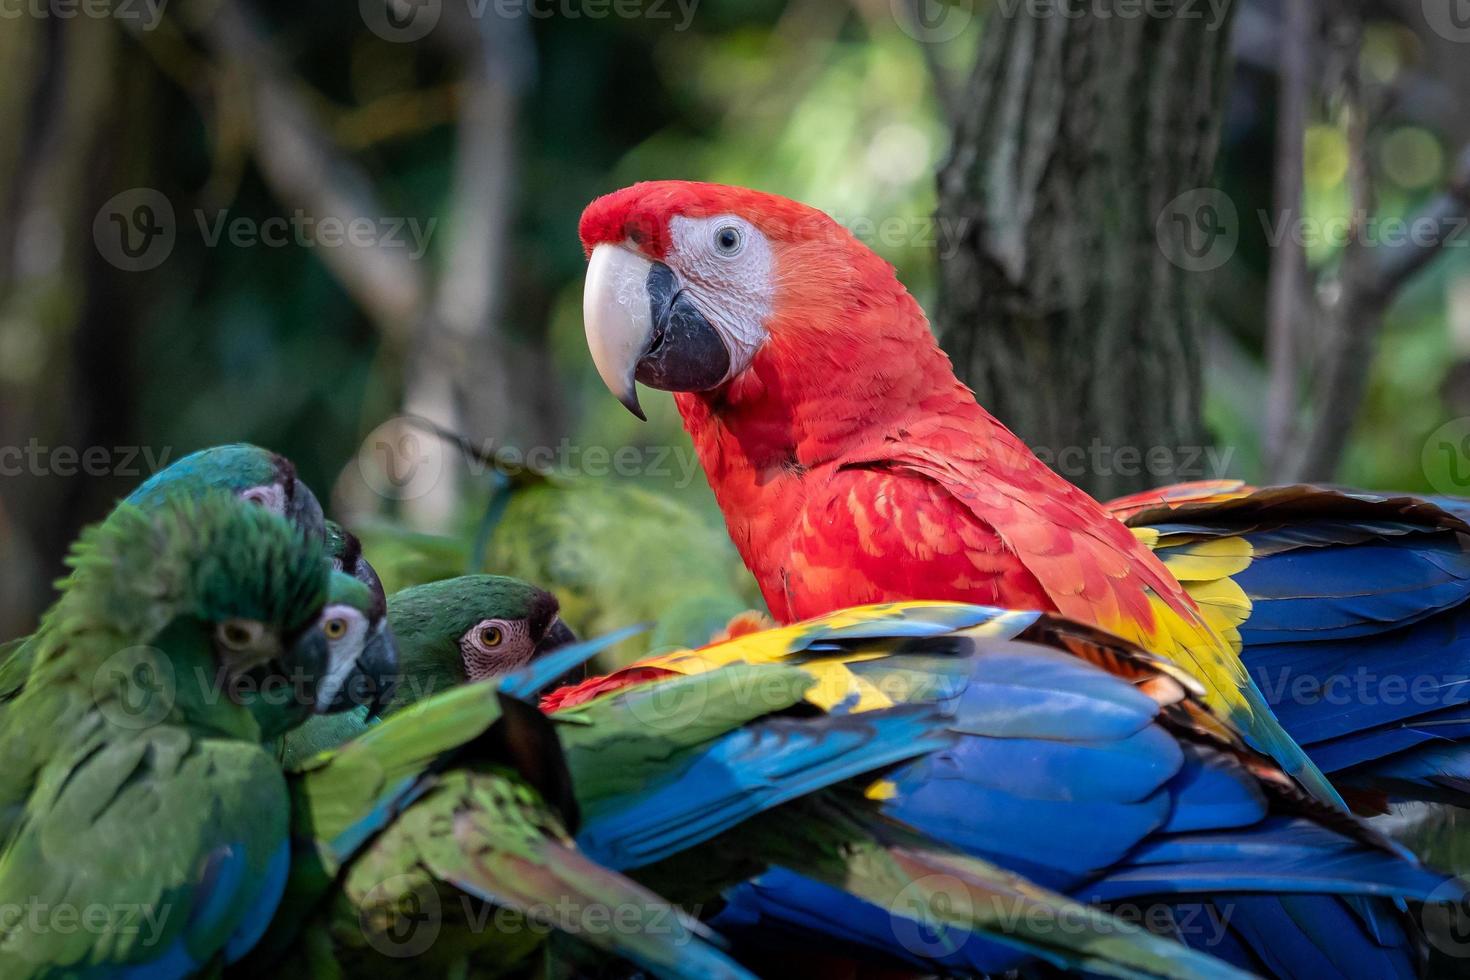 Group of Ara parrots, Red parrot Scarlet Macaw, Ara macao and military macaw photo